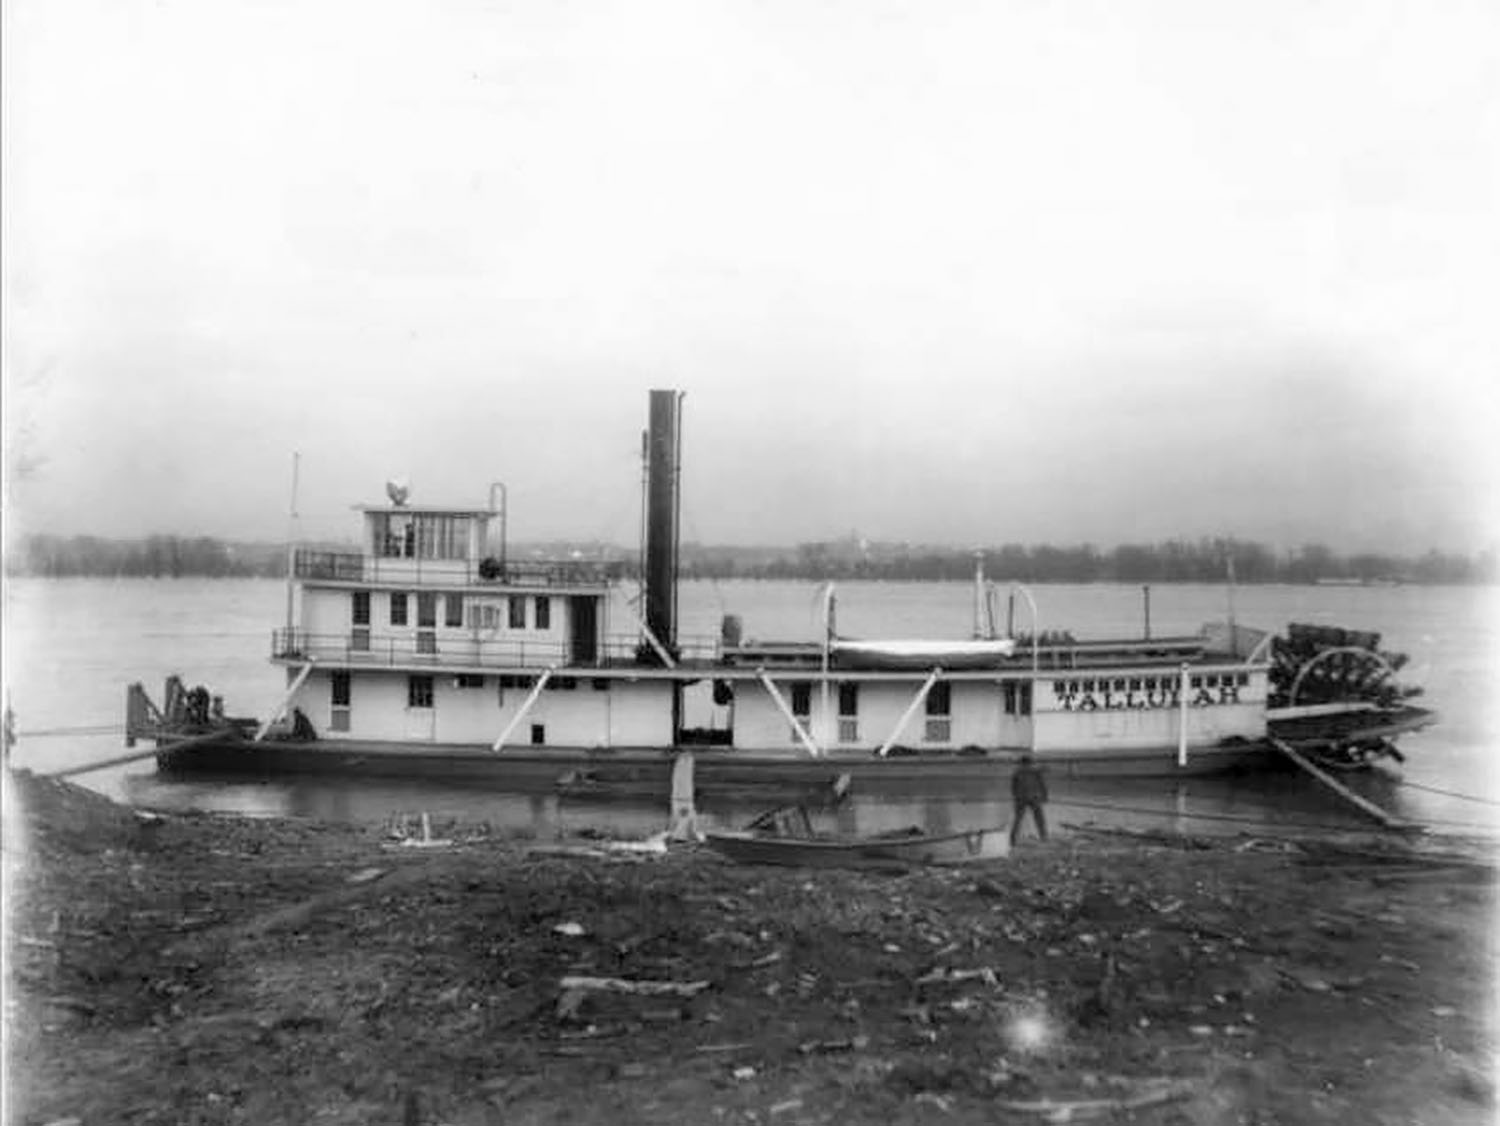 The Tallulah new at Howards. (Dan Owen Boat Photo Museum collection)